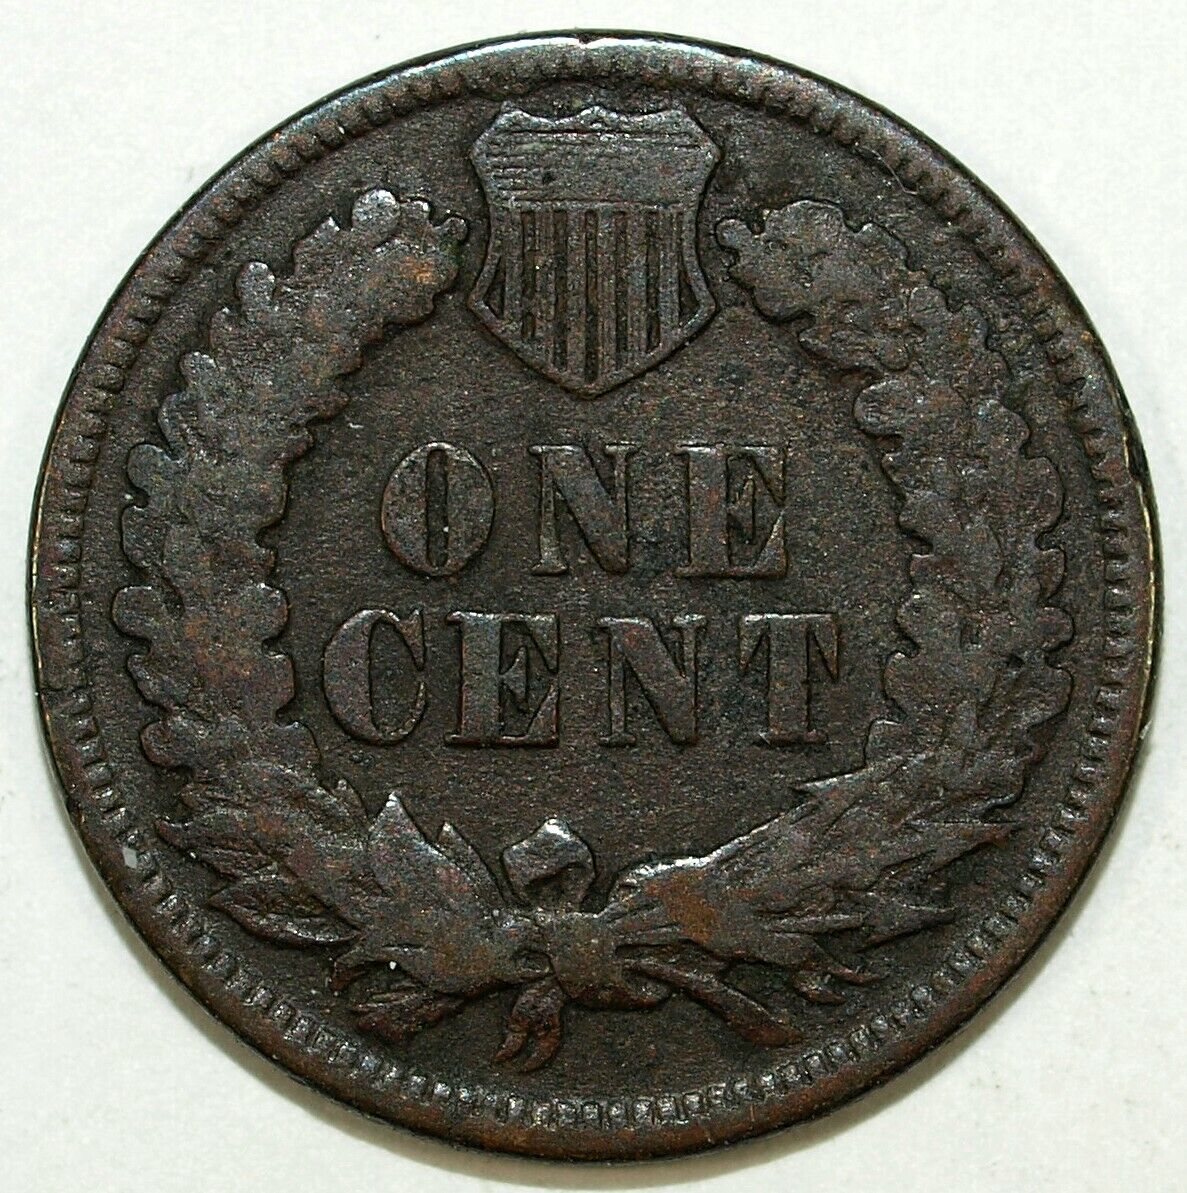 1879 Indian Head Circulated Cent ☆☆ Damaged ☆☆ Great Set Filler